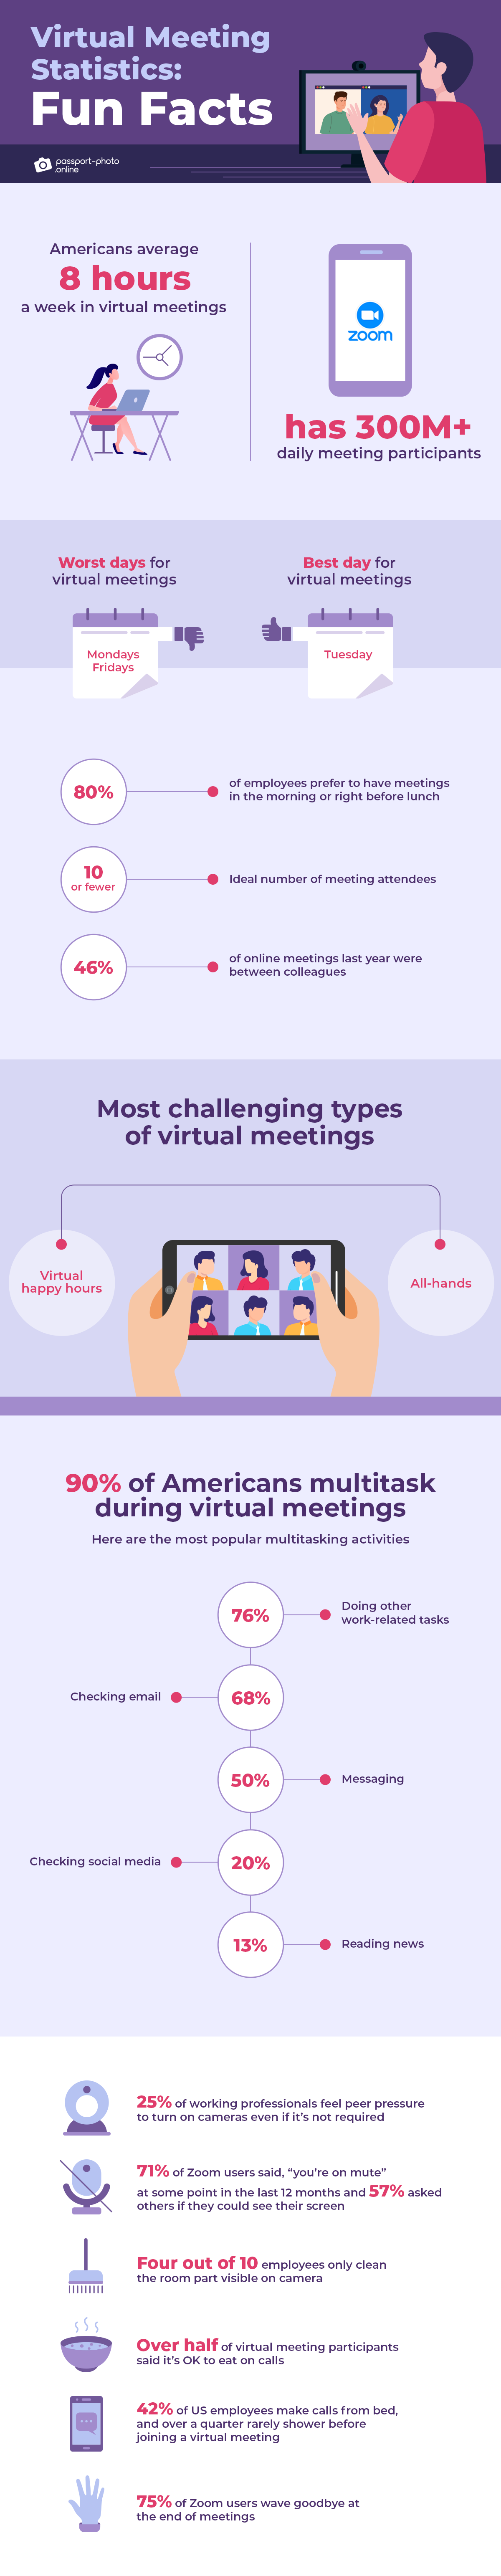 fun facts about virtual meetings